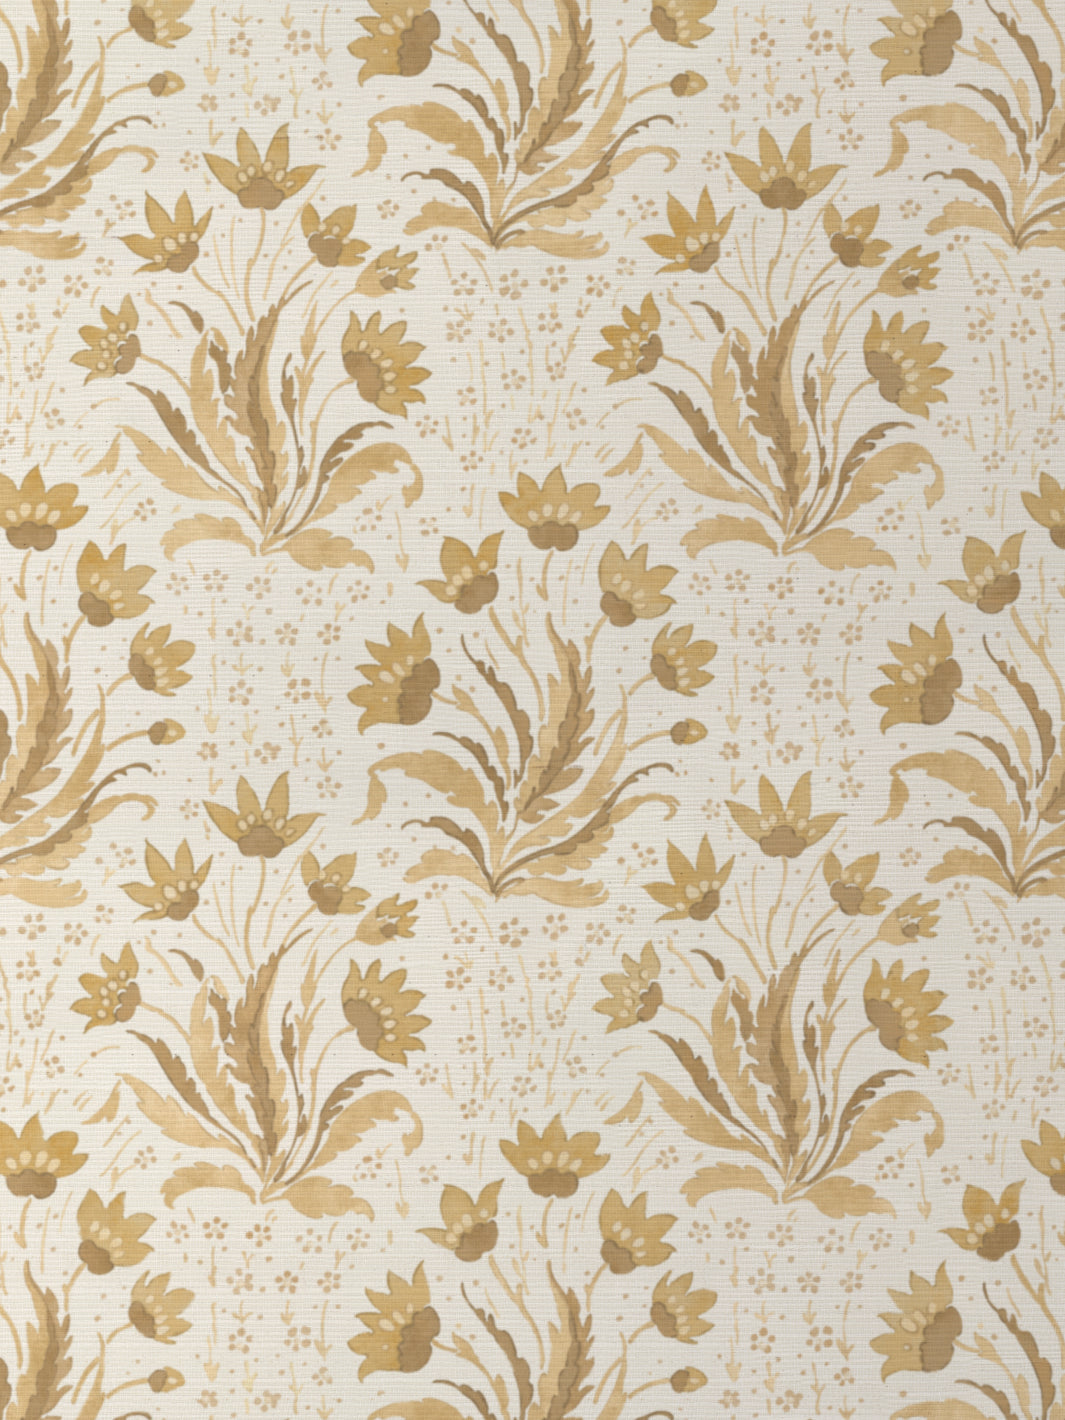 'Hillhouse Floral Tonal' Grasscloth Wallpaper by Nathan Turner - Mustard